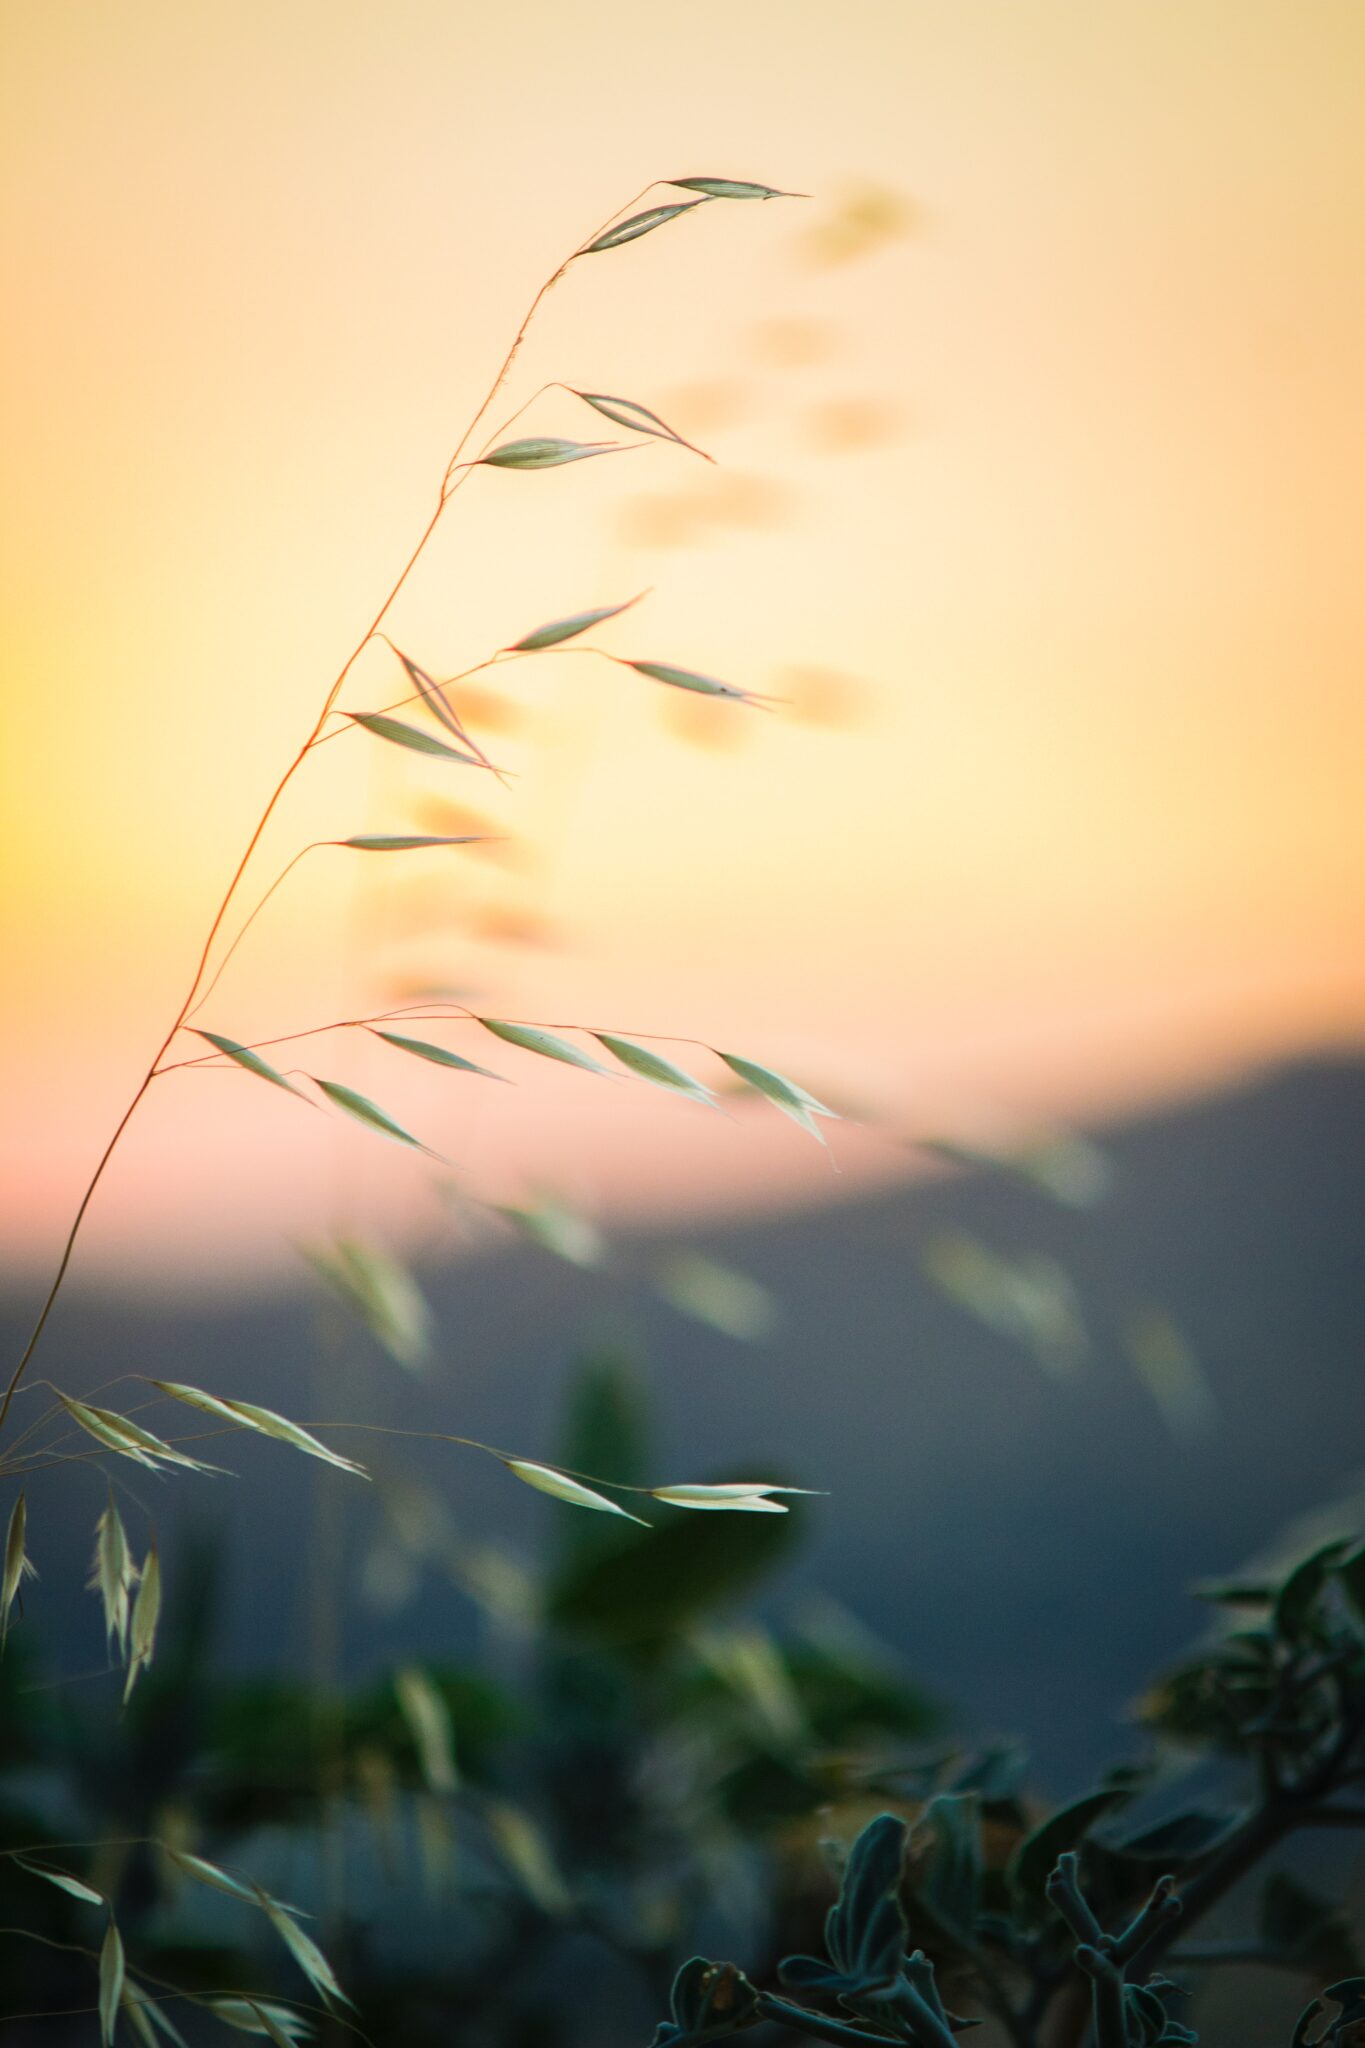 Upclose picture of a single strand of grass framed by the evening sunset. Anxiety causes real and stressful physical symptoms. If you have physical distress caused by anxiety an online therapist in north carolina can help.